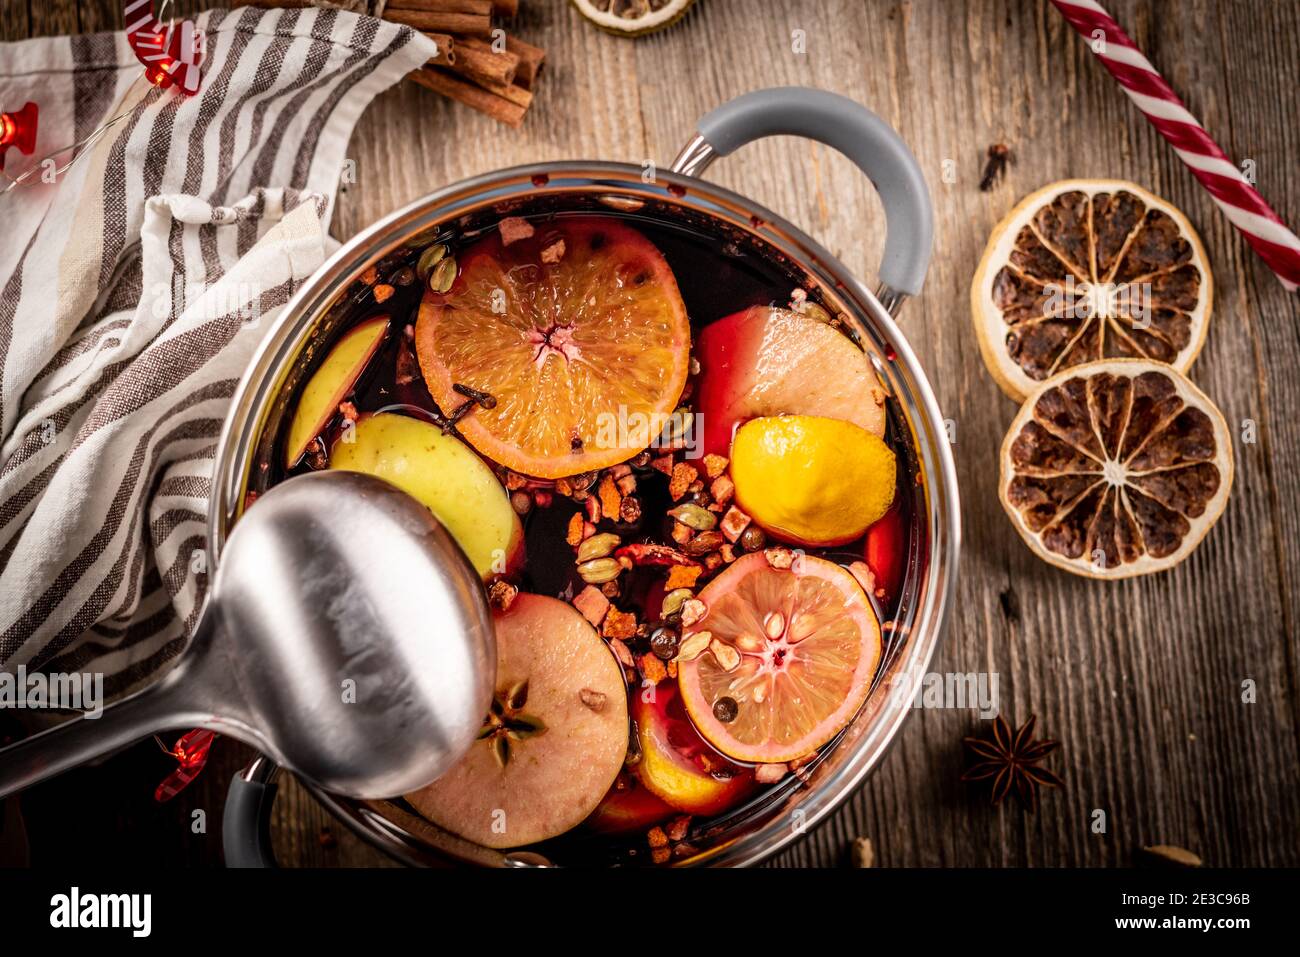 Pot with wine and spicy fruits Stock Photo